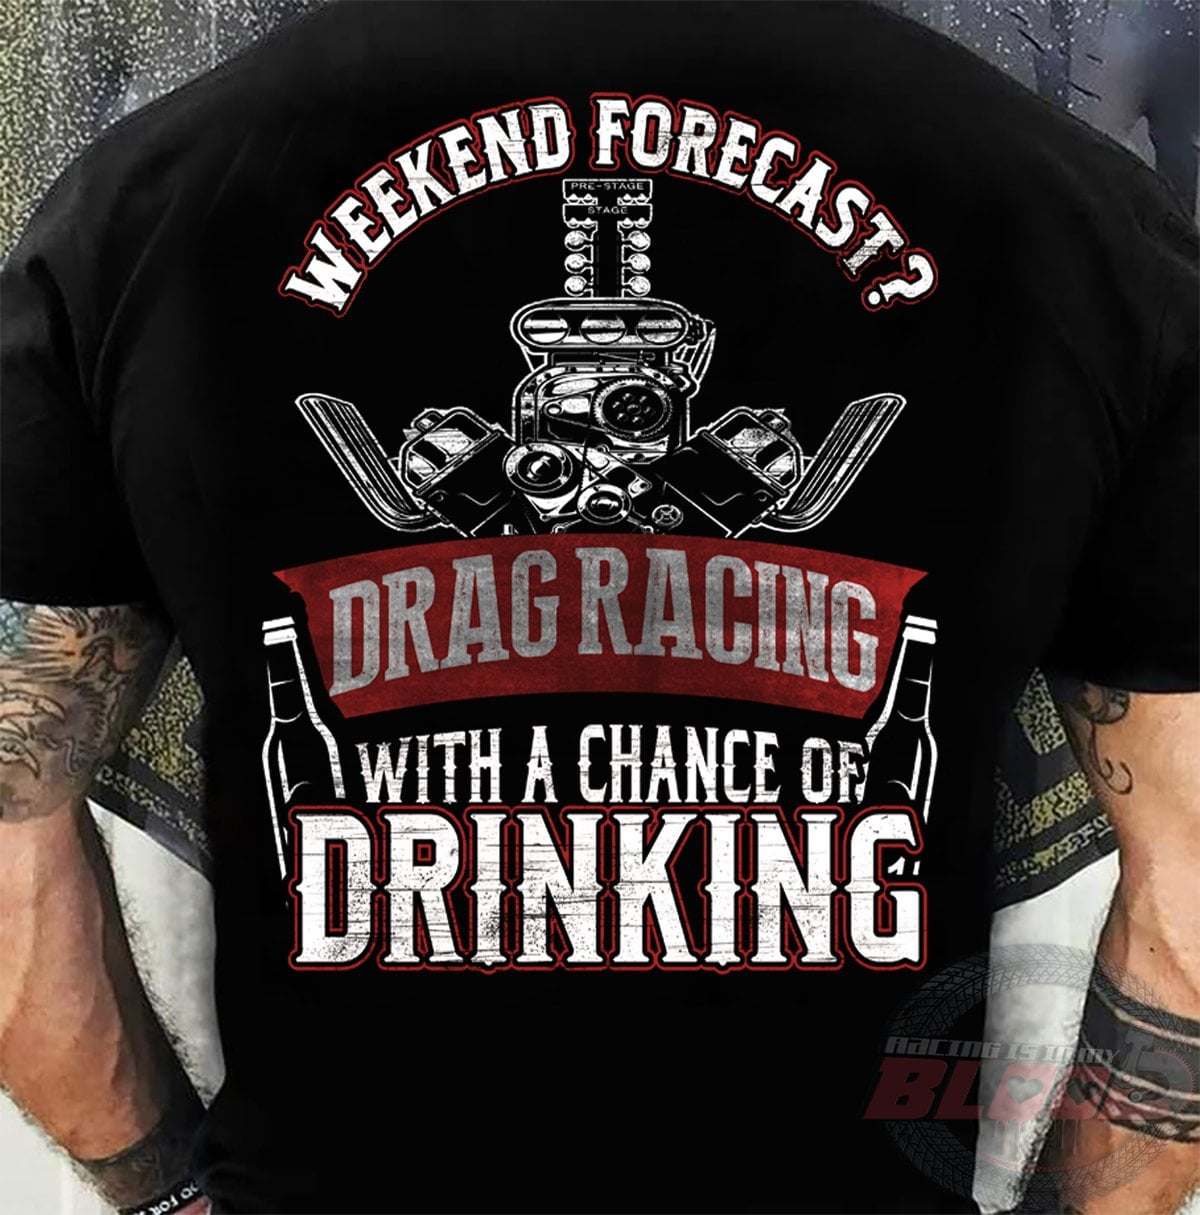 Drag Racing - Weekend forecast drag racing with a chance of drinking